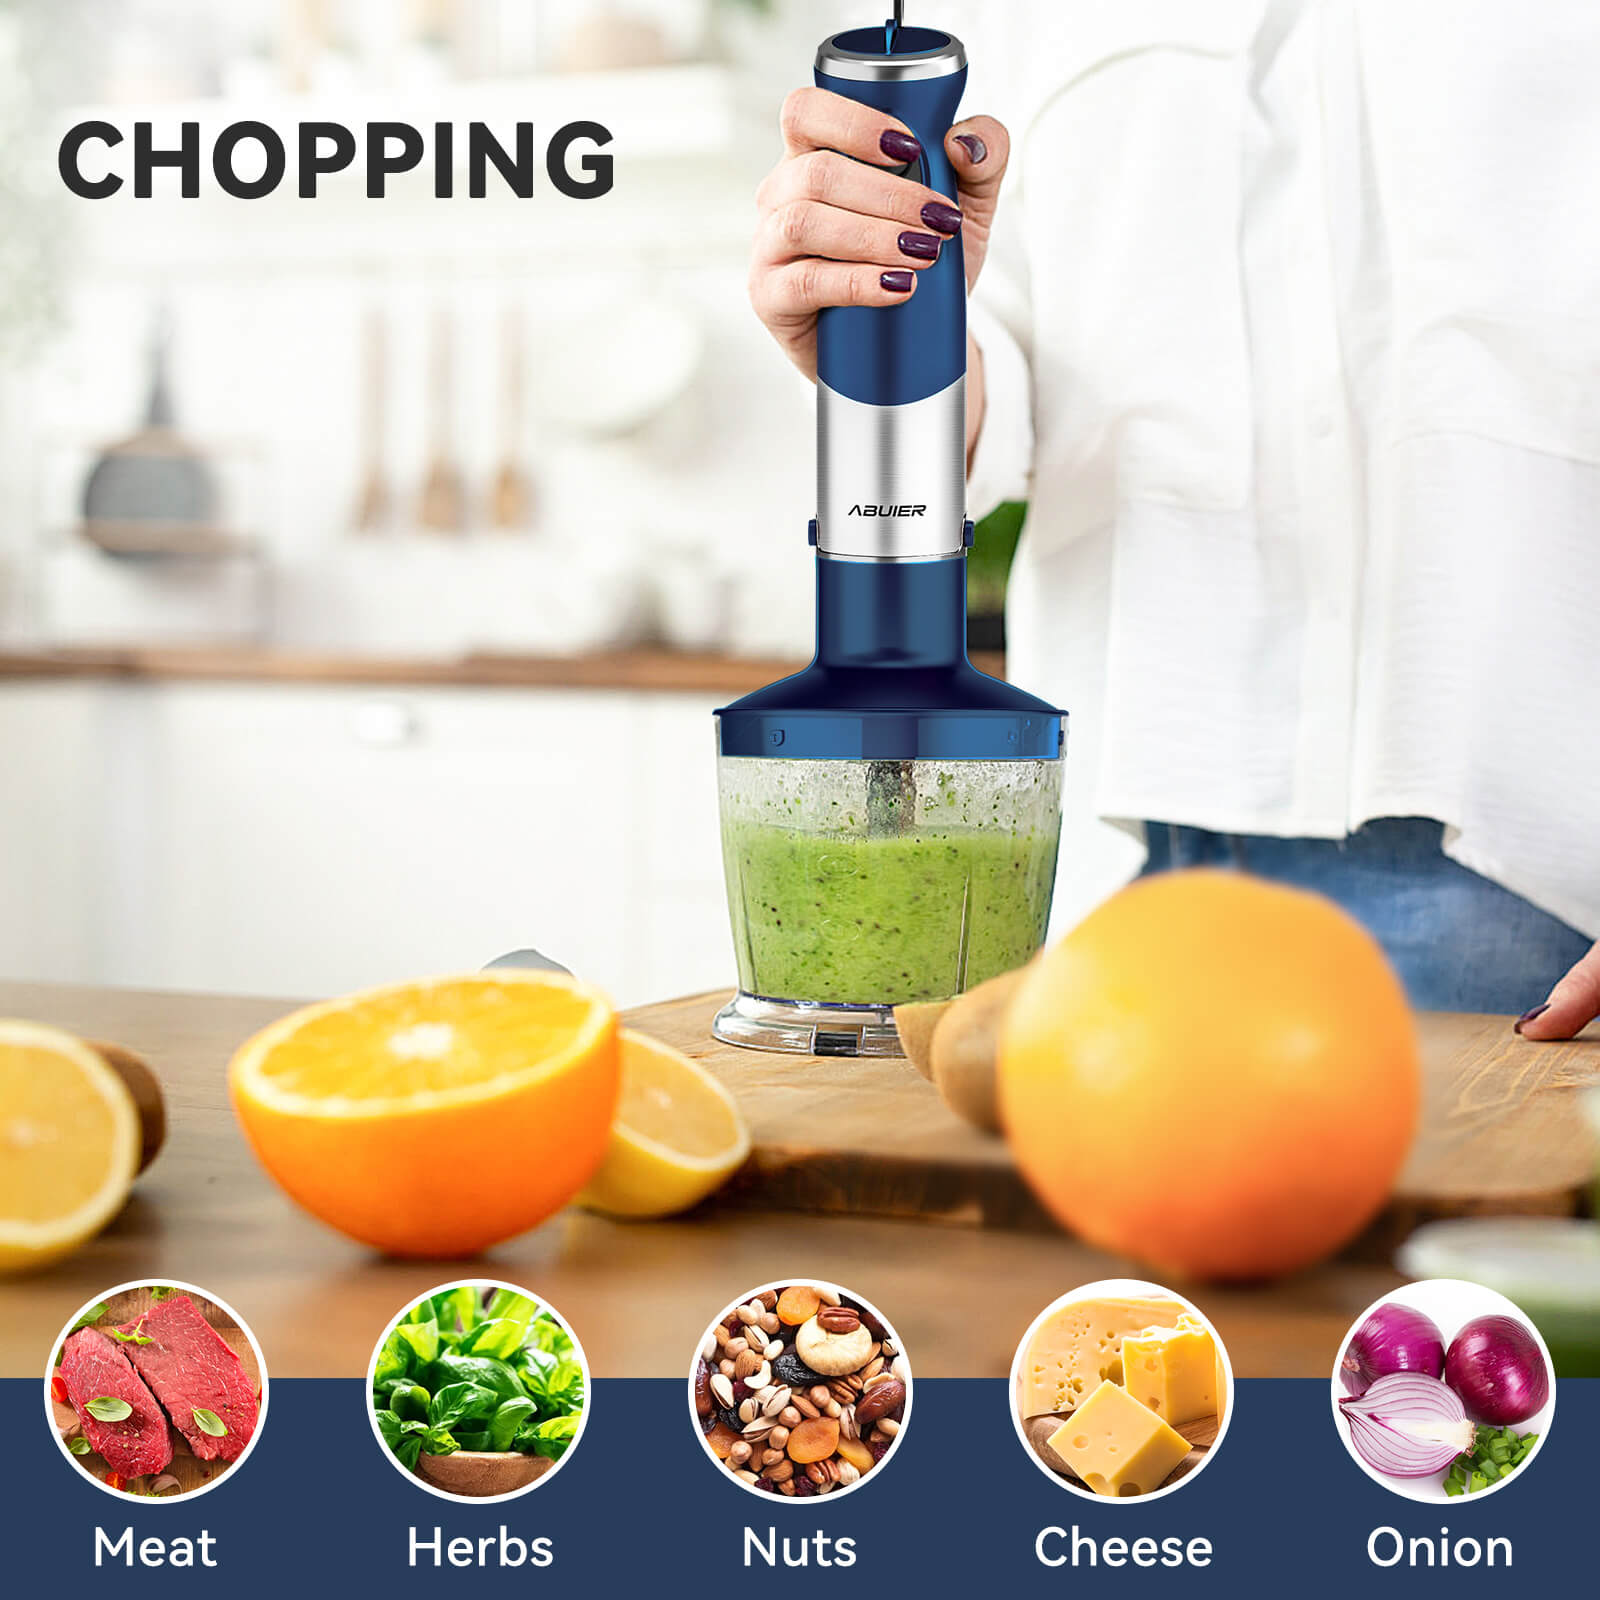 Nutri Chopper 5-in-1 Compact Portable Handheld Kitchen Slicer with